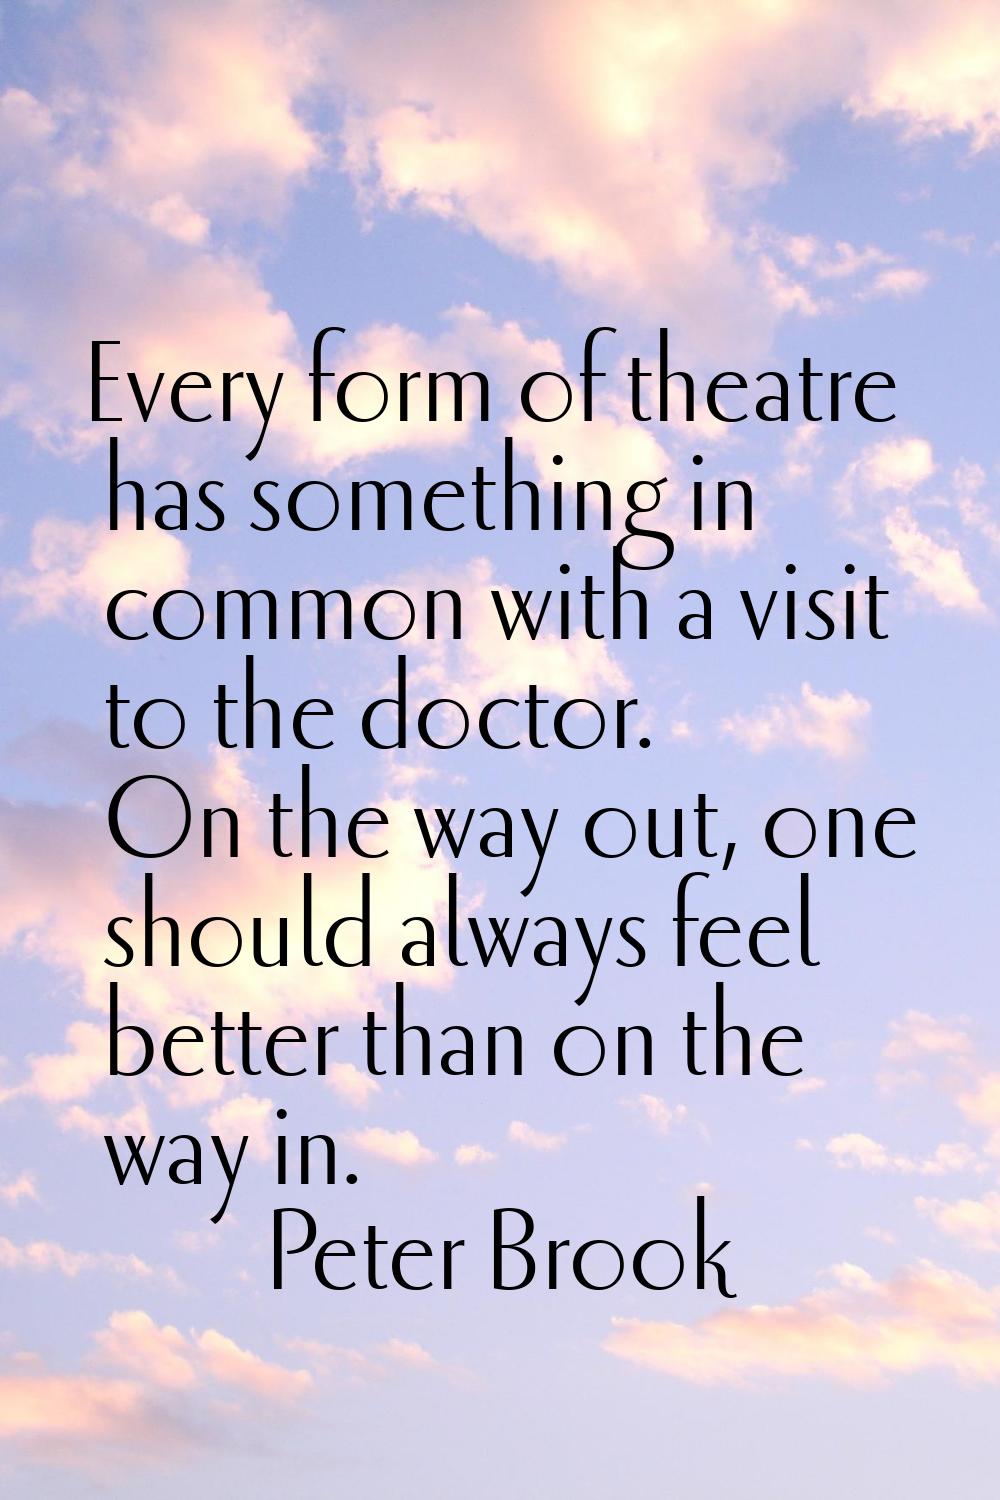 Every form of theatre has something in common with a visit to the doctor. On the way out, one shoul